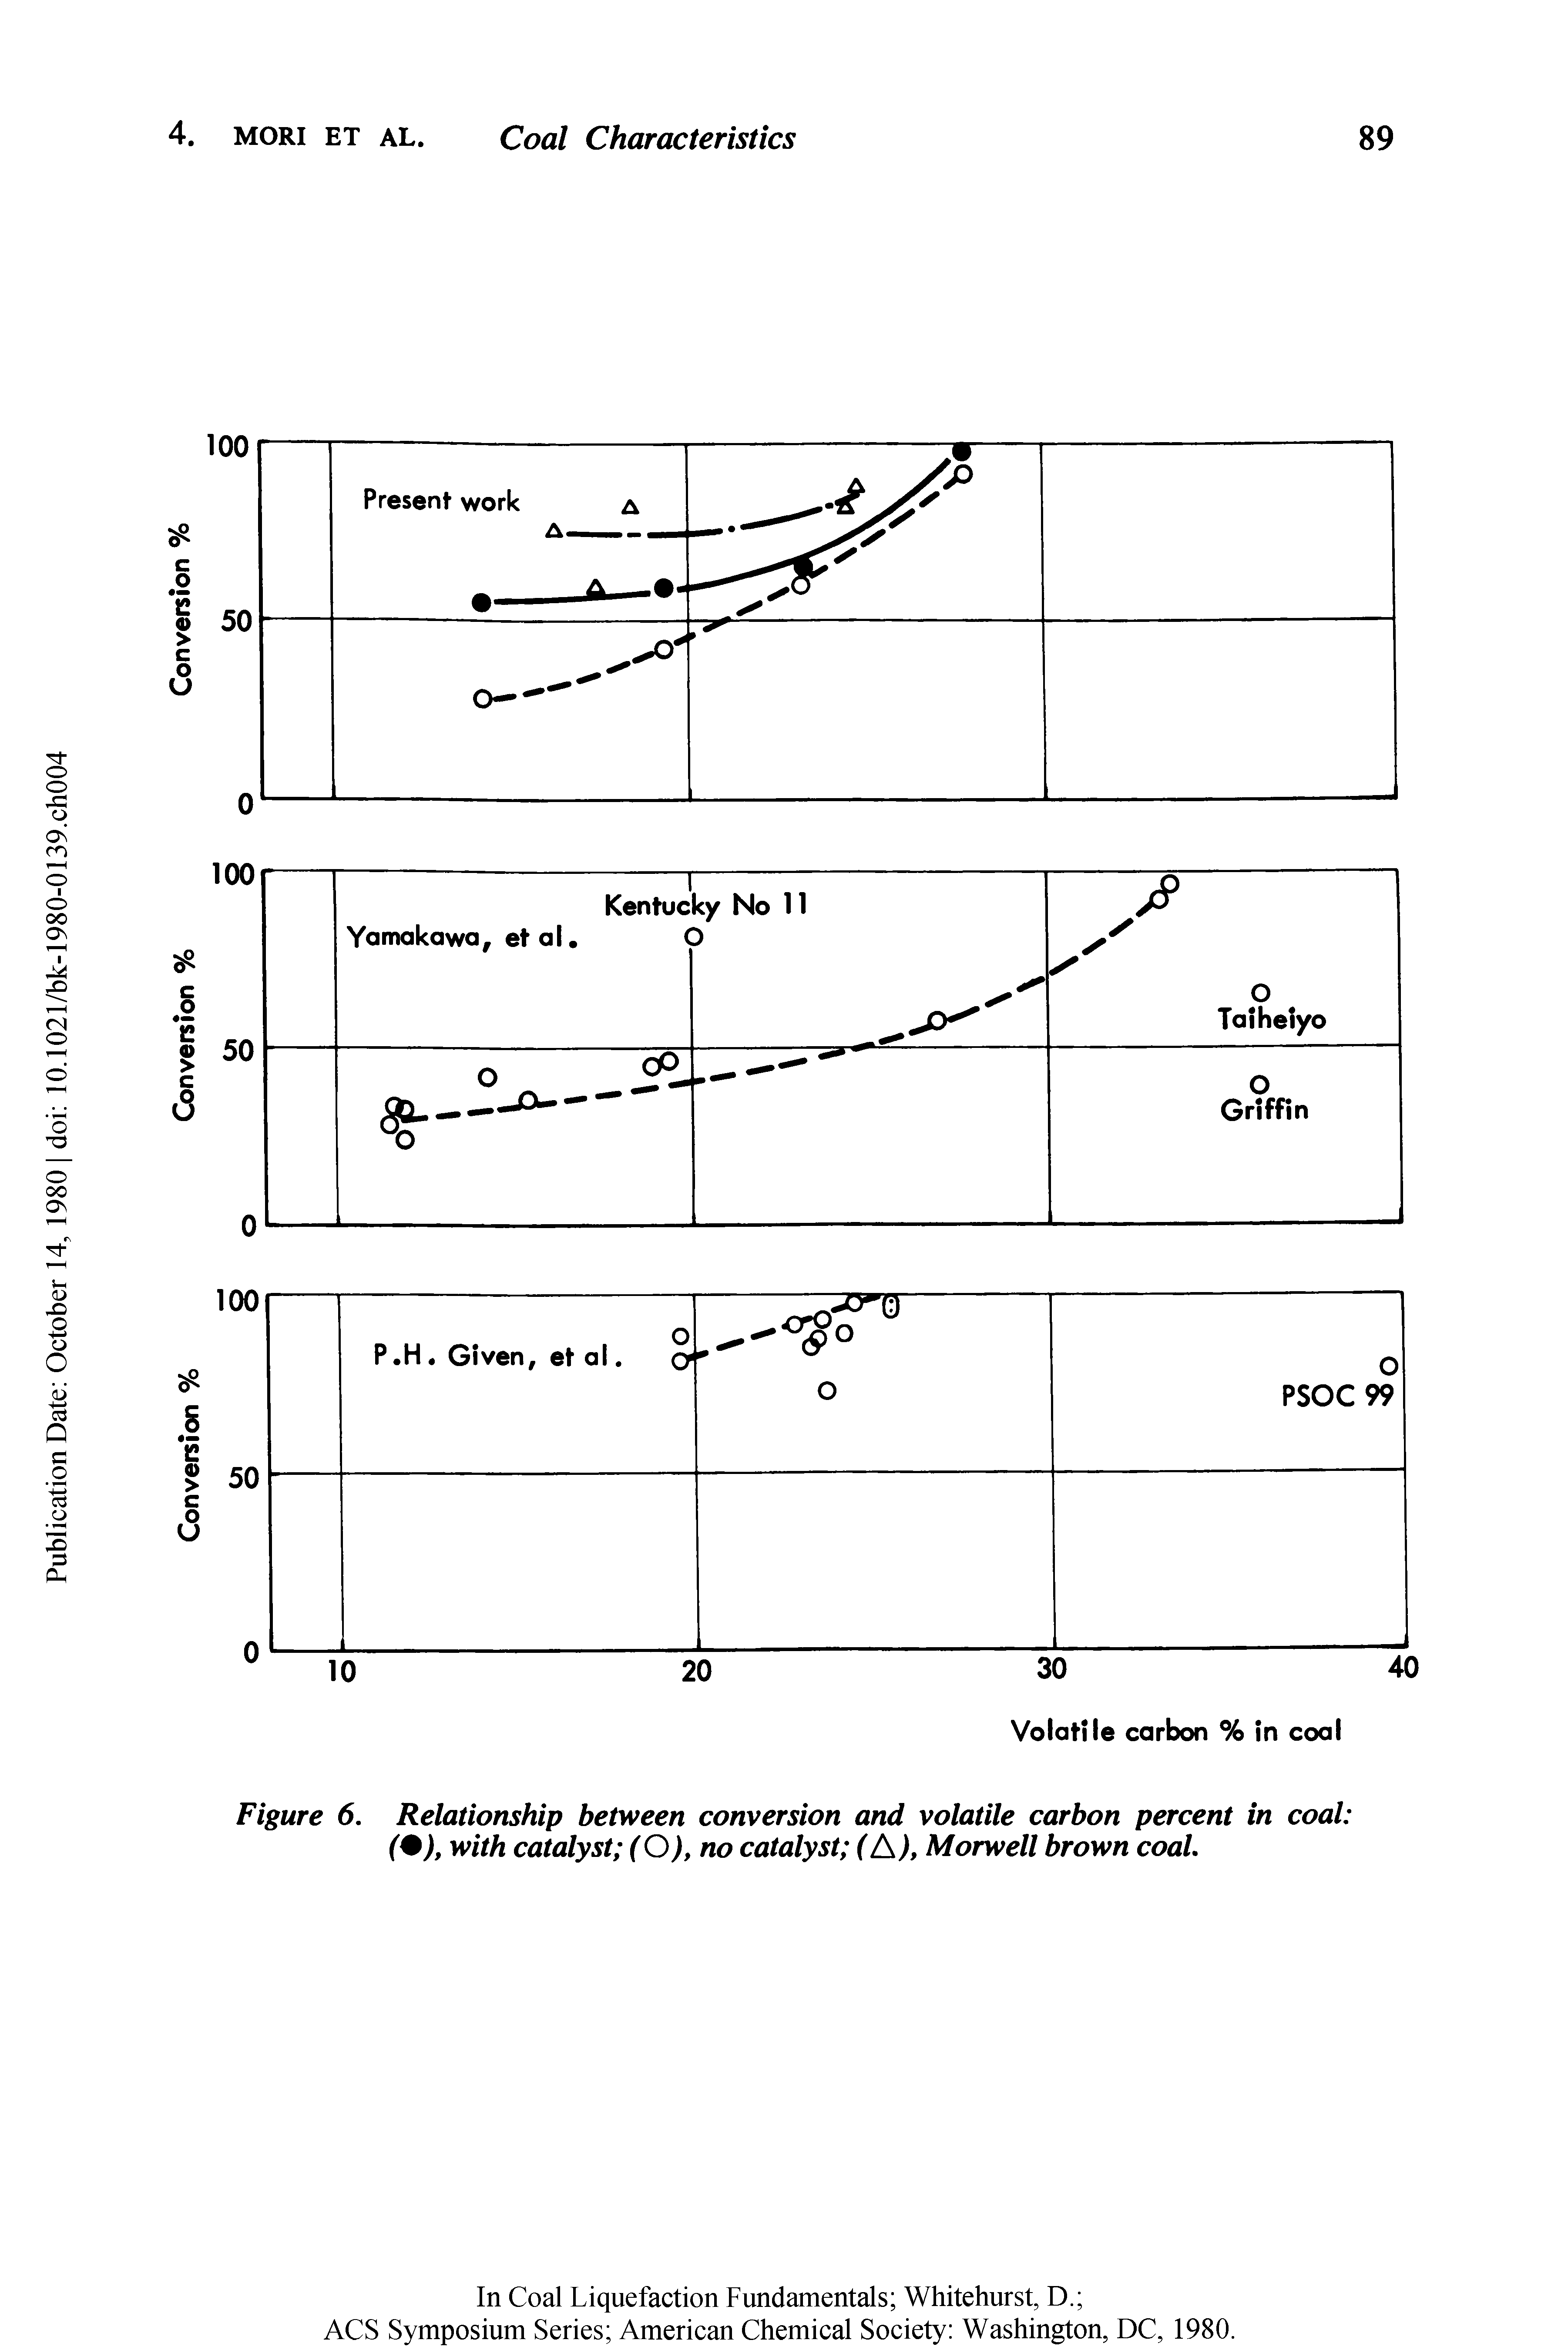 Figure 6. Relationship between conversion and volatile carbon percent in coal (+), with catalyst (O), no catalyst (A), Morwell brown coal...